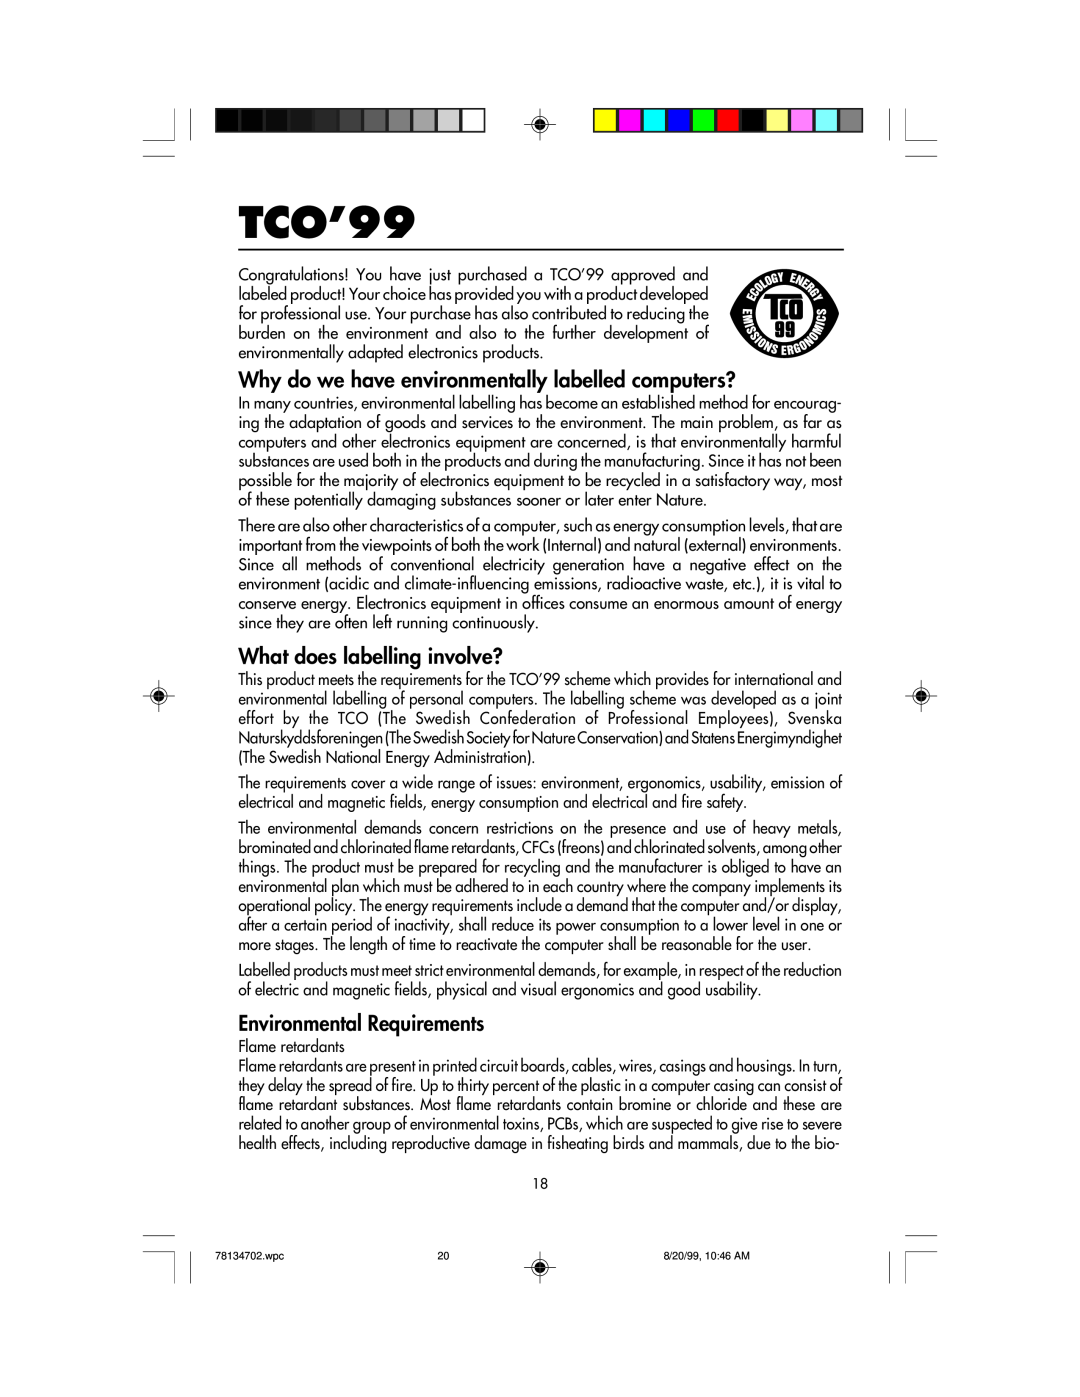 NEC LCD1510+ user manual TCO’99, What does labelling involve?, Environmental Requirements 